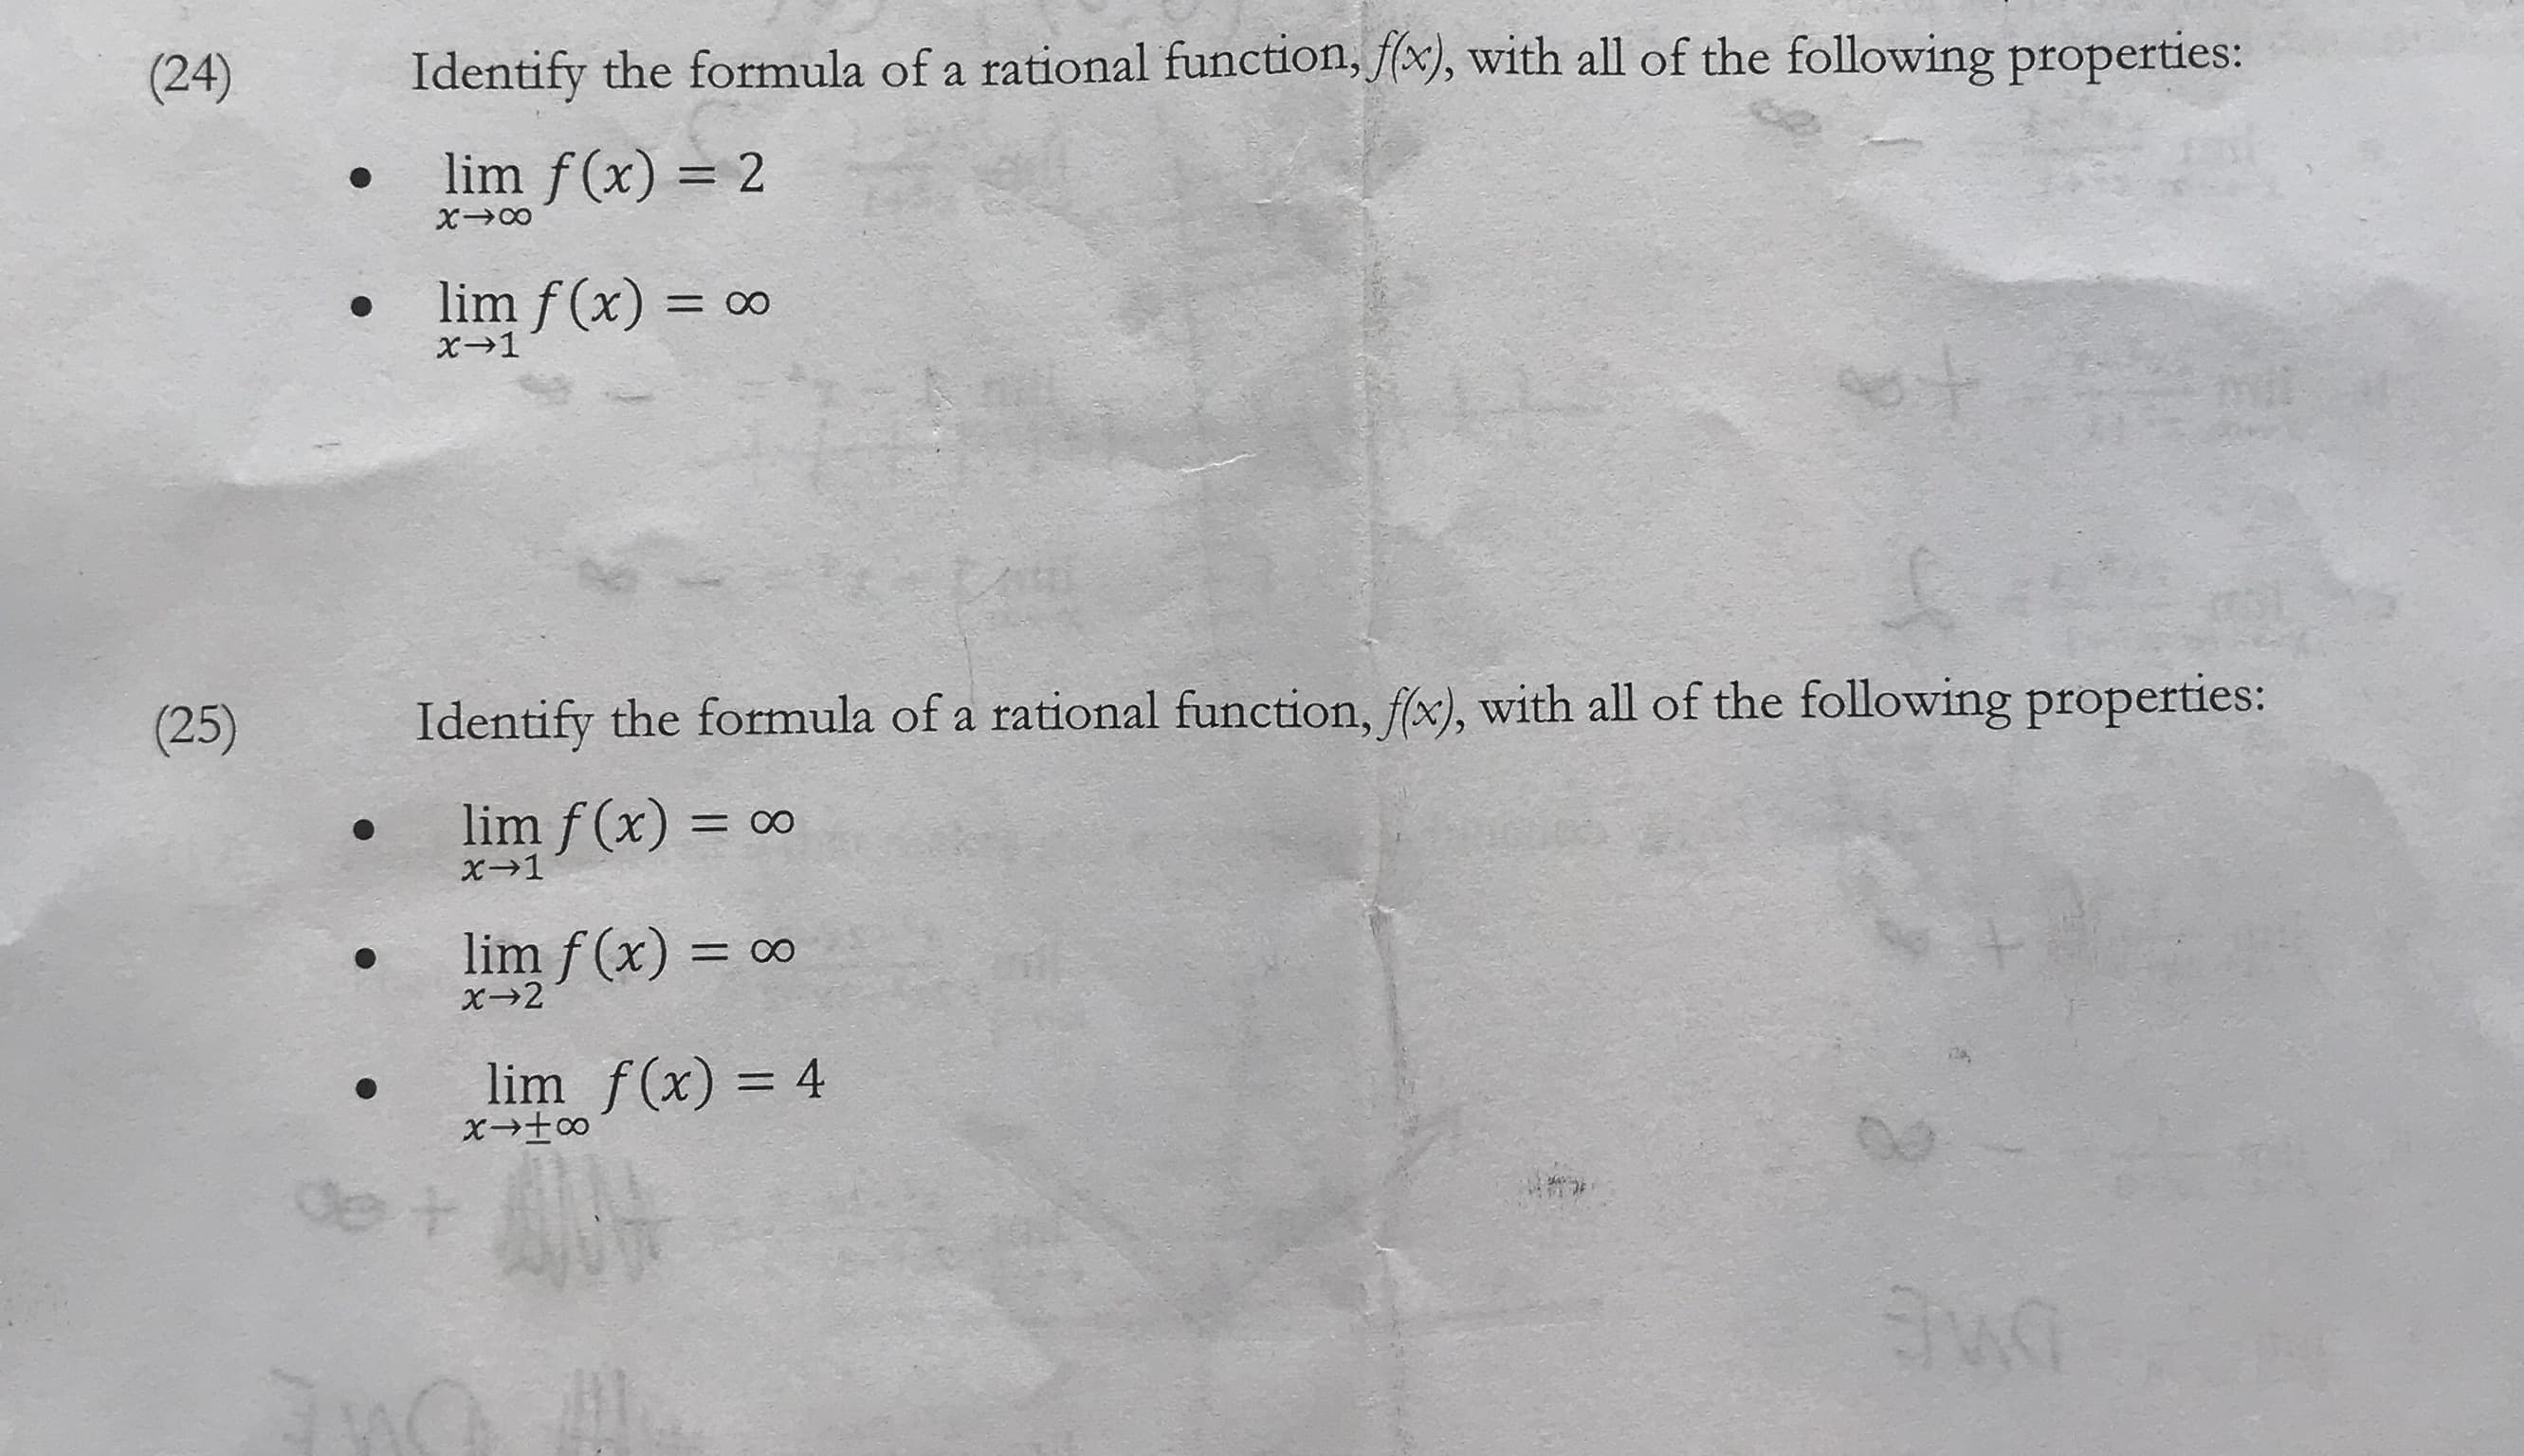 Identify the formula of a rational function, fx), with all of the following properties:
(24)
lim f(x) 2
lim f (x)
- OO
x1
mt
Identify the formula of a rational function, f(x), with all of the following properties:
(25)
lim f (x) 0o
x1
lim f (x)
=OO
x2
lim f(x) 4
de r
tKG
2
